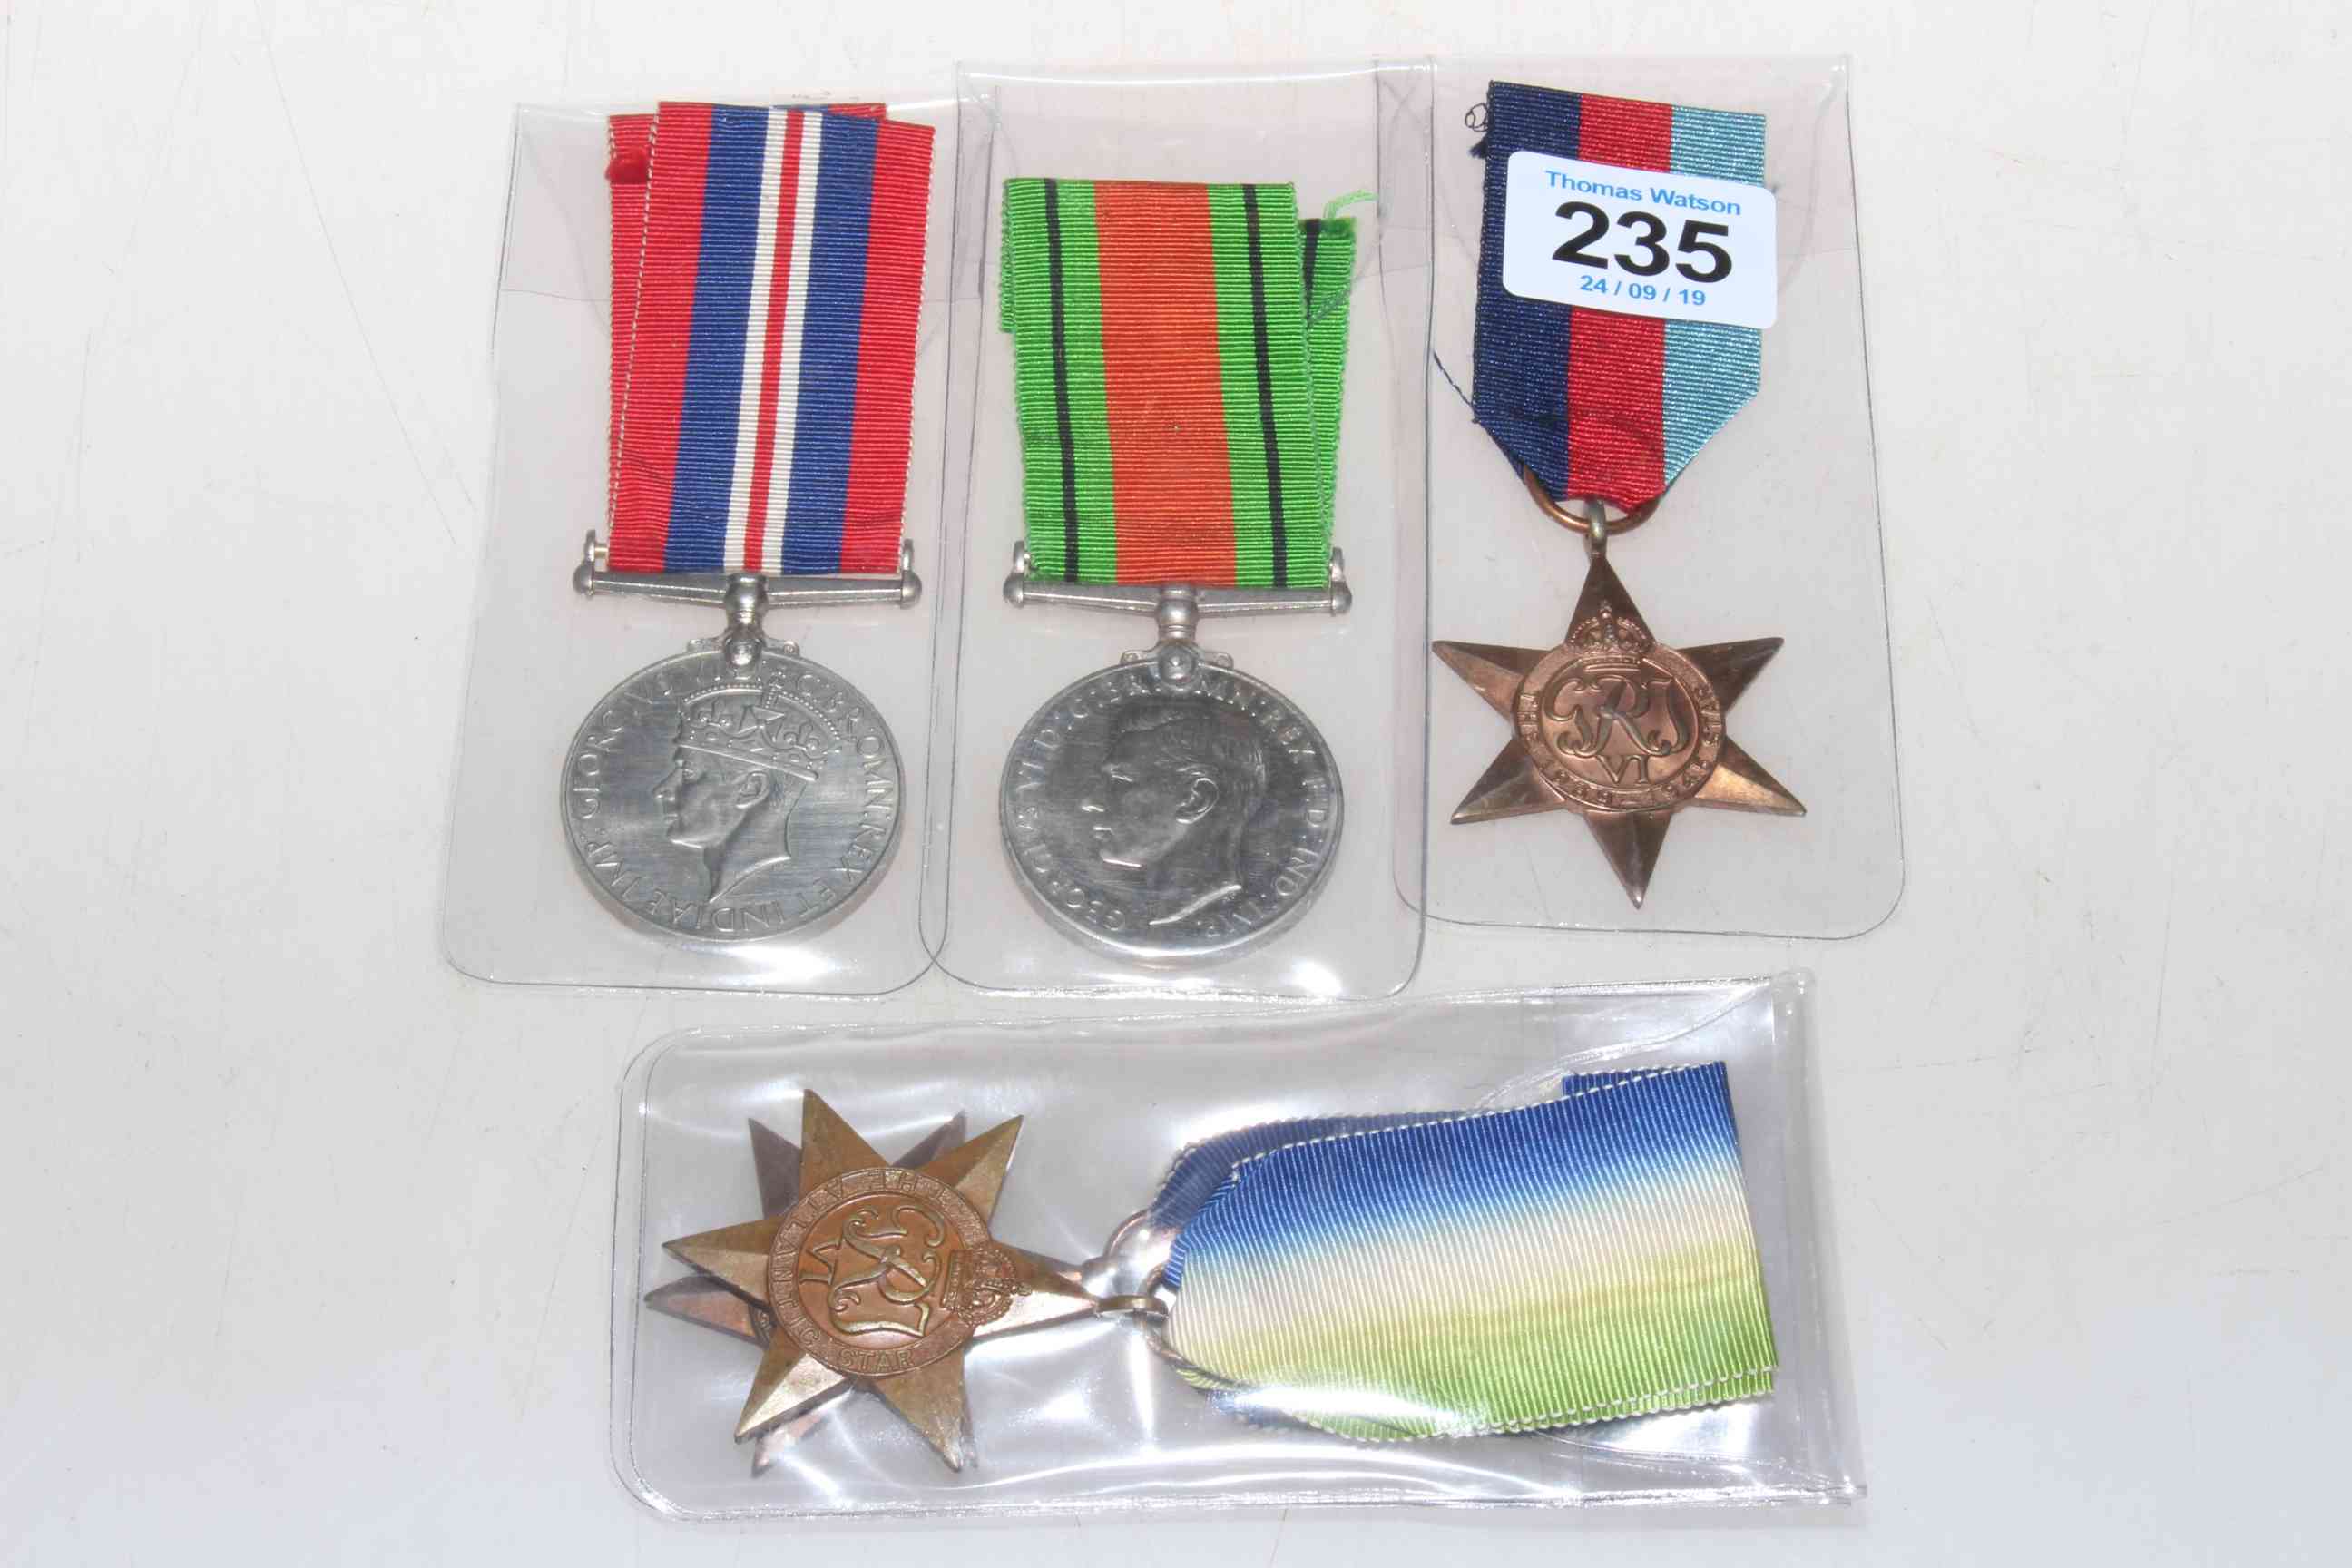 Four WWII medals with ribbons.